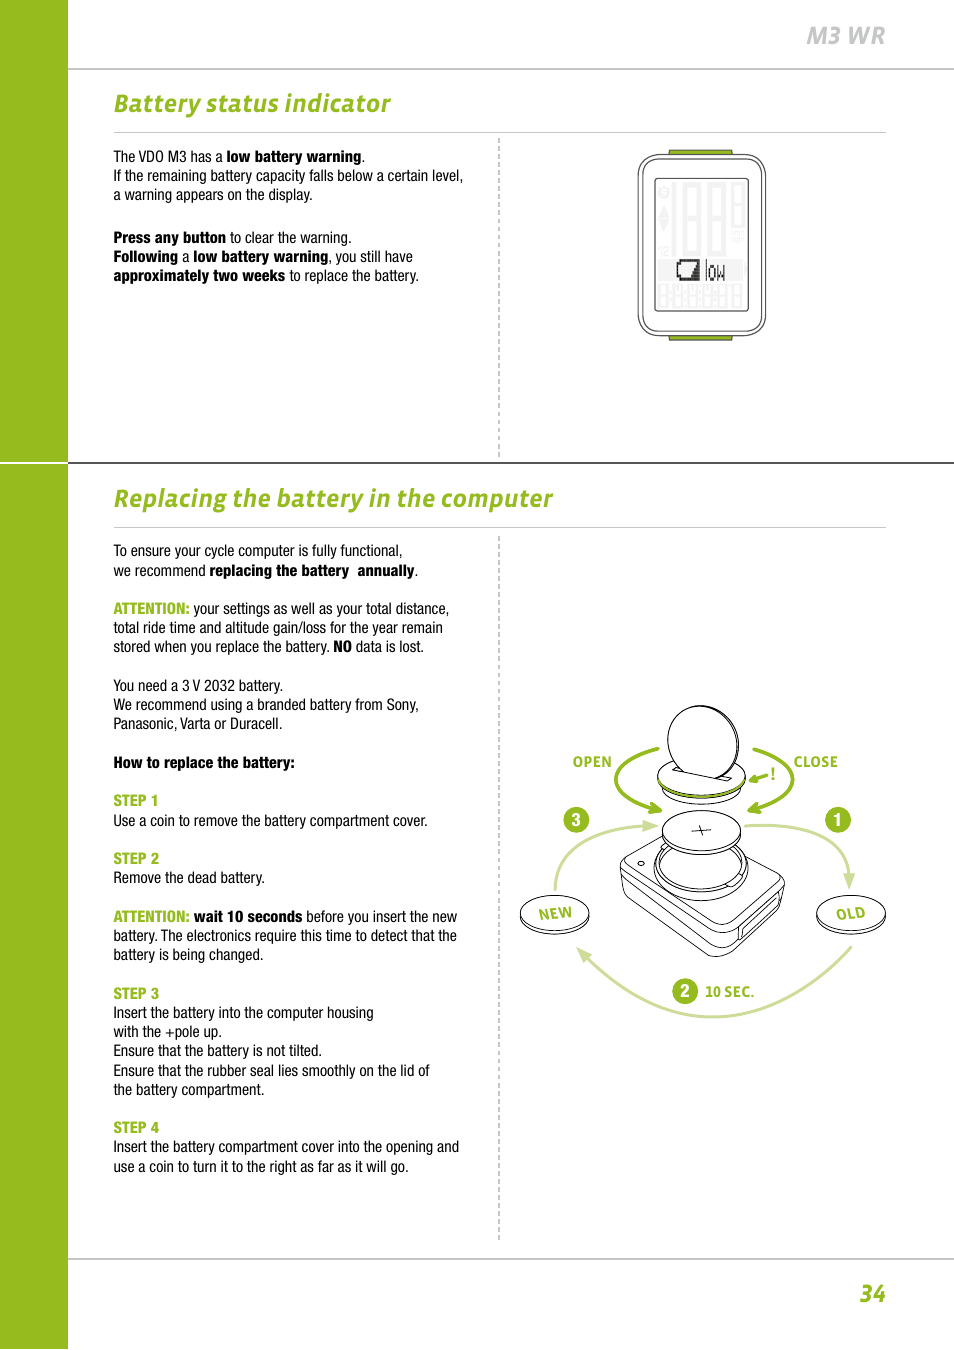 34 m3 wr, Replacing the battery in the computer, Battery status indicator | VDO M3WR User Manual | Page 34 / 39